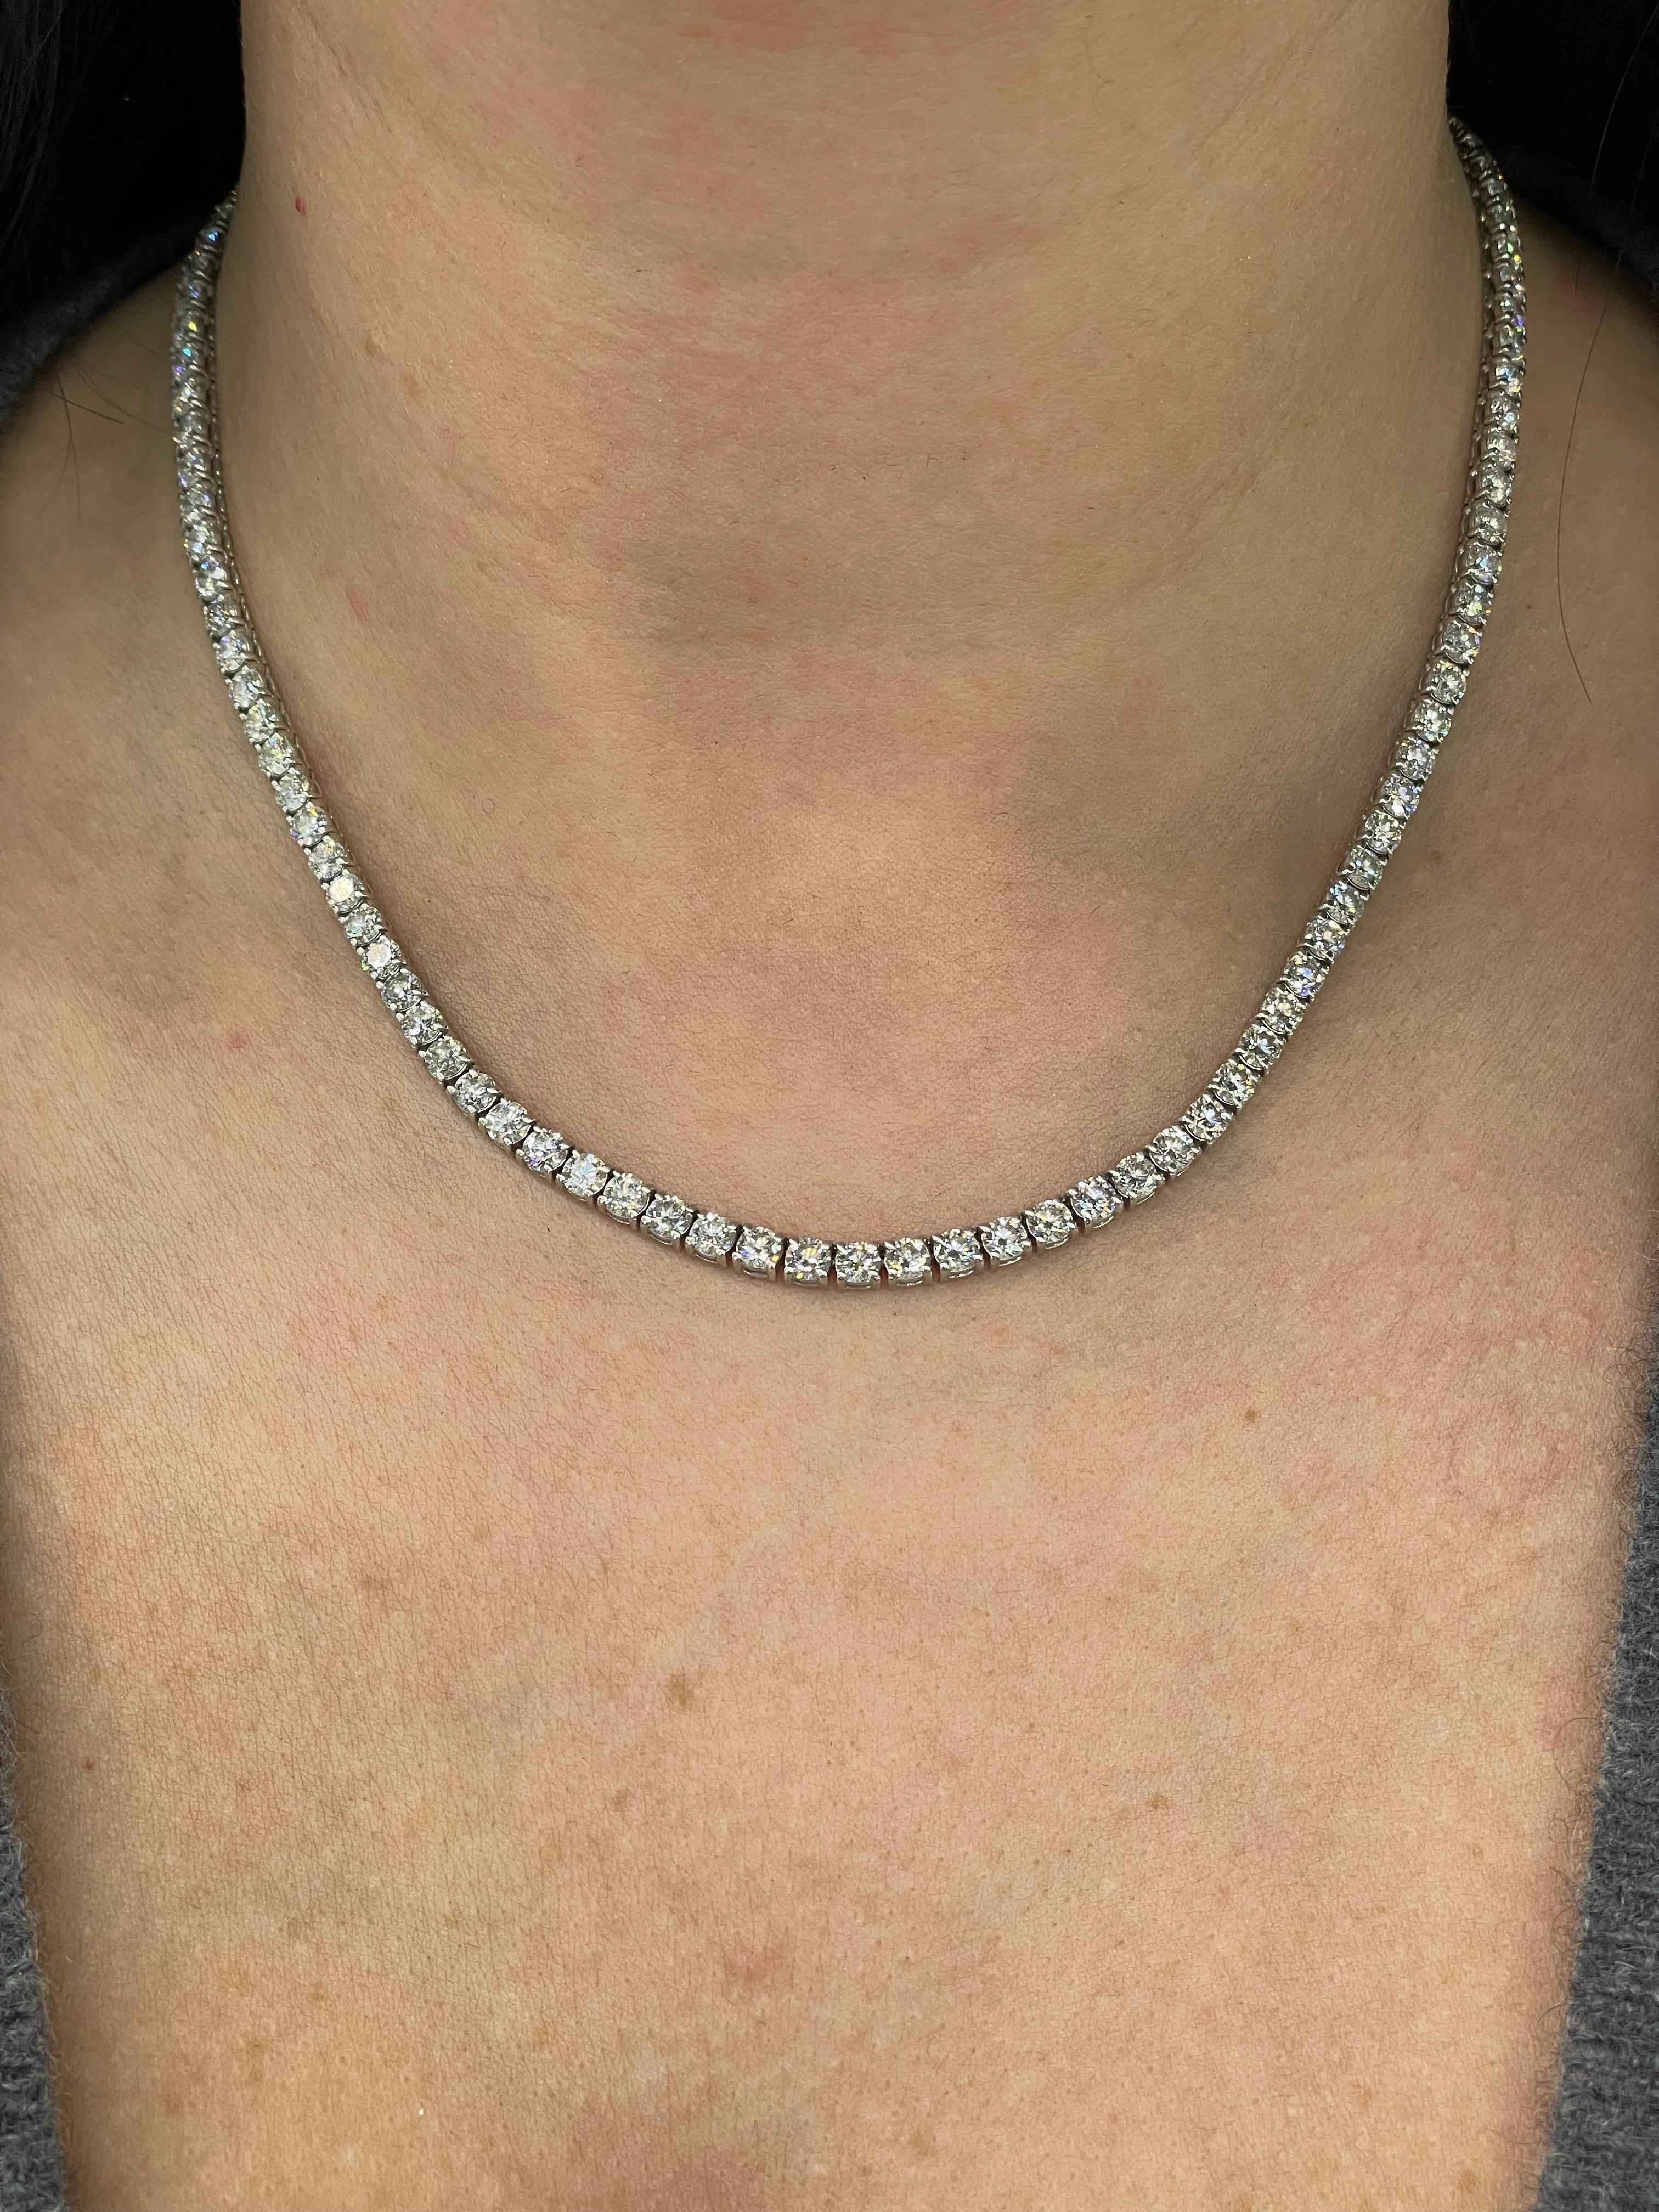 Diamonds Straight Line Necklace 17.25 Carats 14k White Gold 0.15 PTS In New Condition For Sale In New York, NY